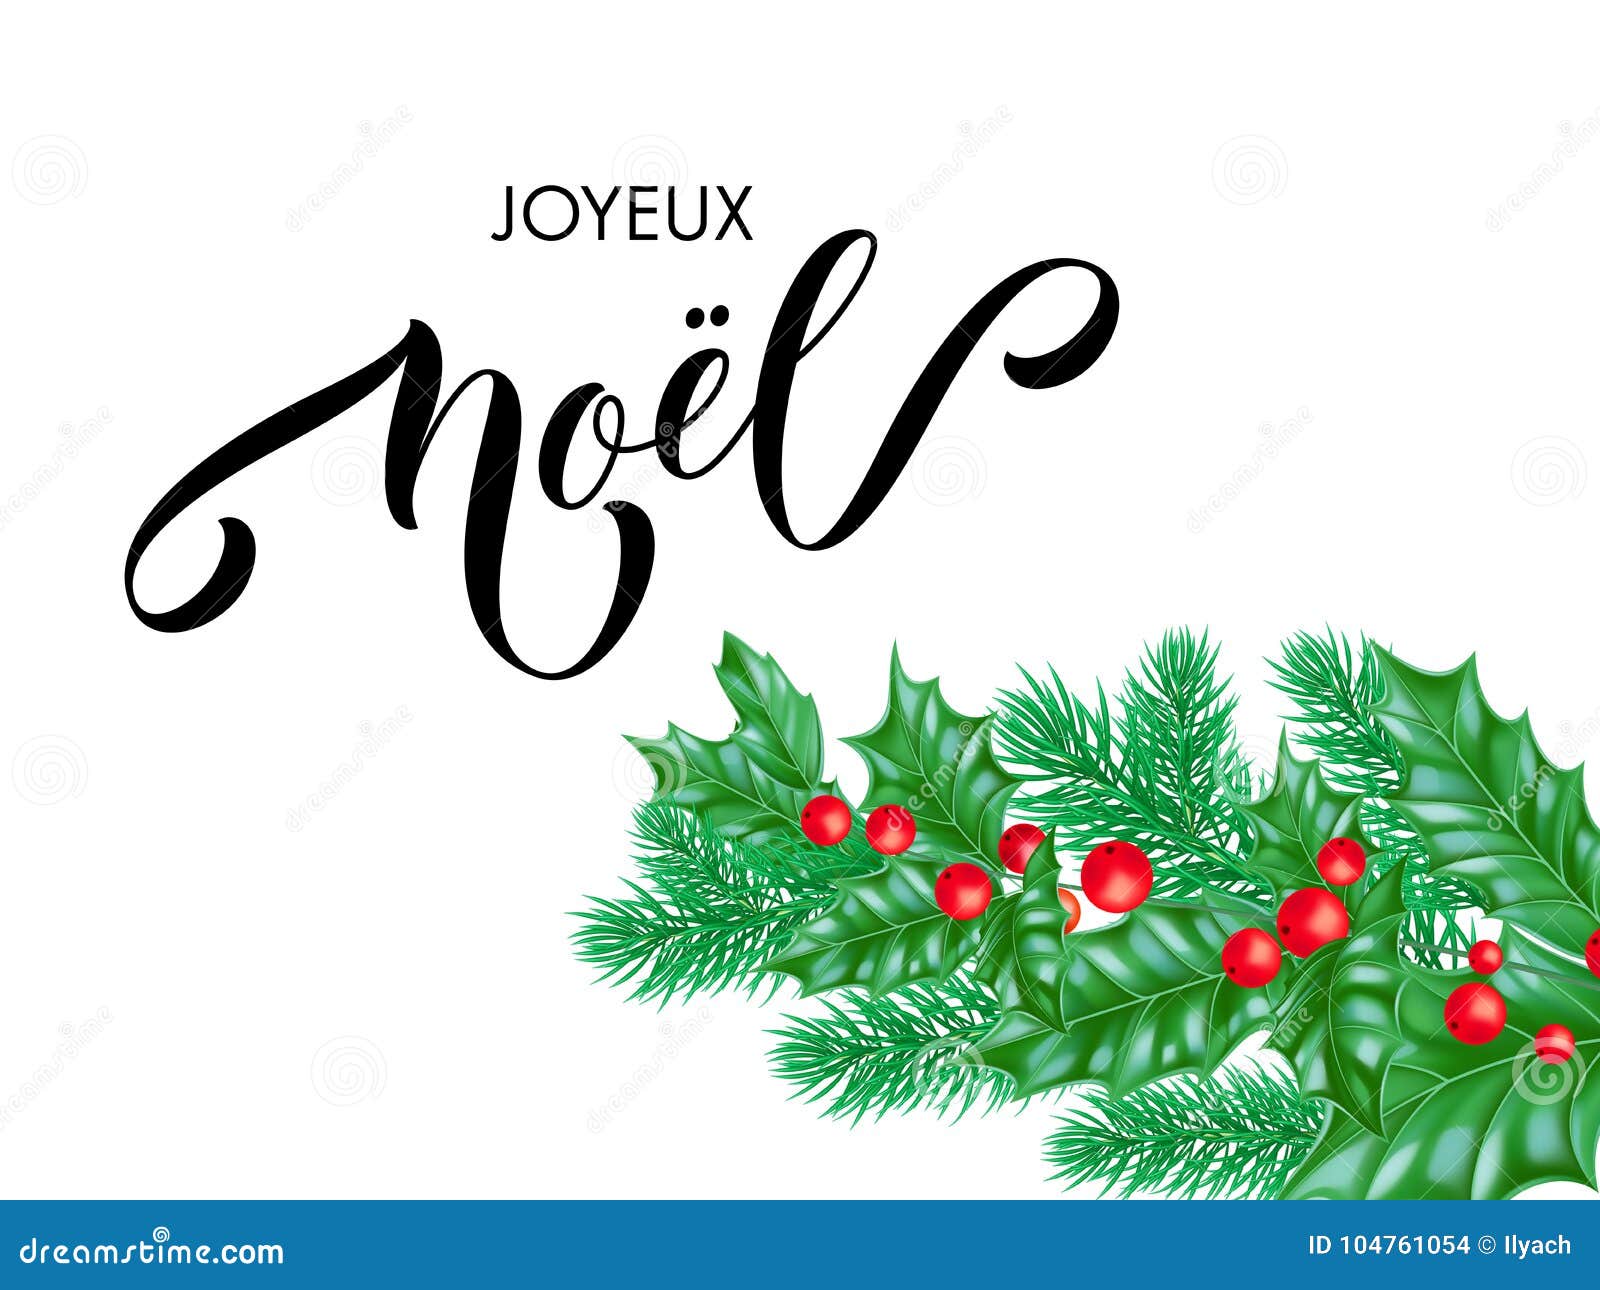 Download Joyeux Noel French Merry Christmas Holiday Hand Drawn Quote Calligraphy Lettering Greeting Card Background Template